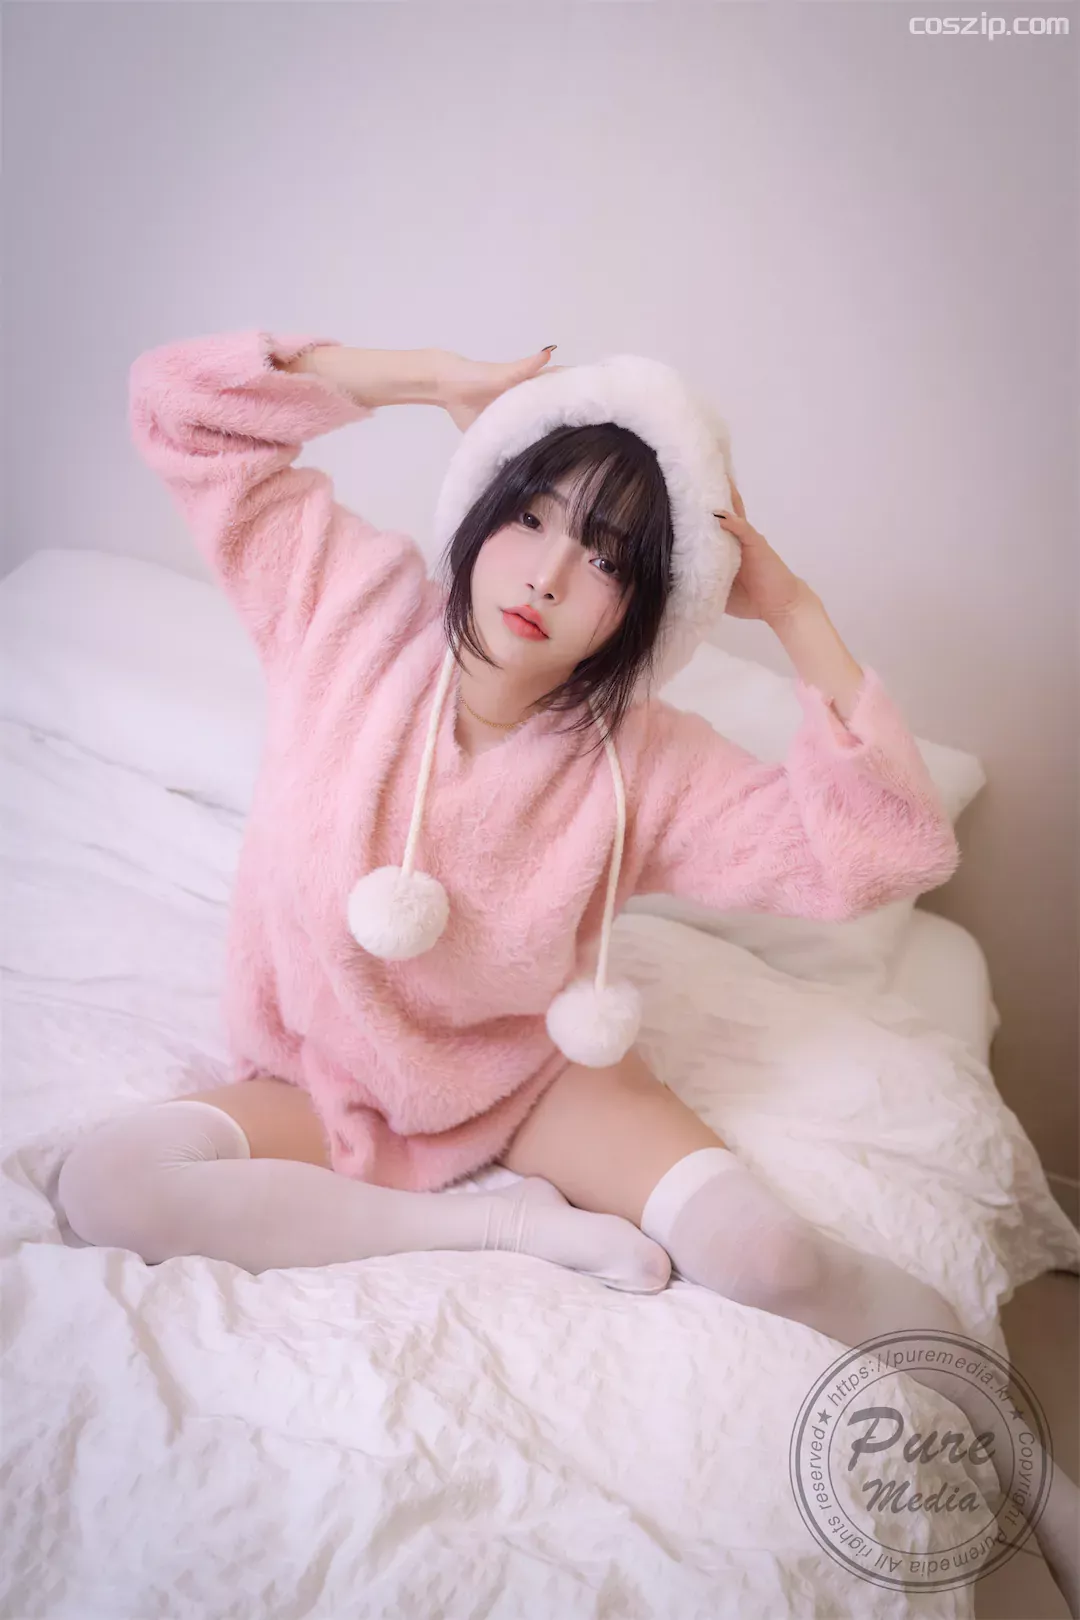 Pure-Media-Vol.266-Jelly-Cutie-Rabbit-and-Pink-Hole-coszip.com-017